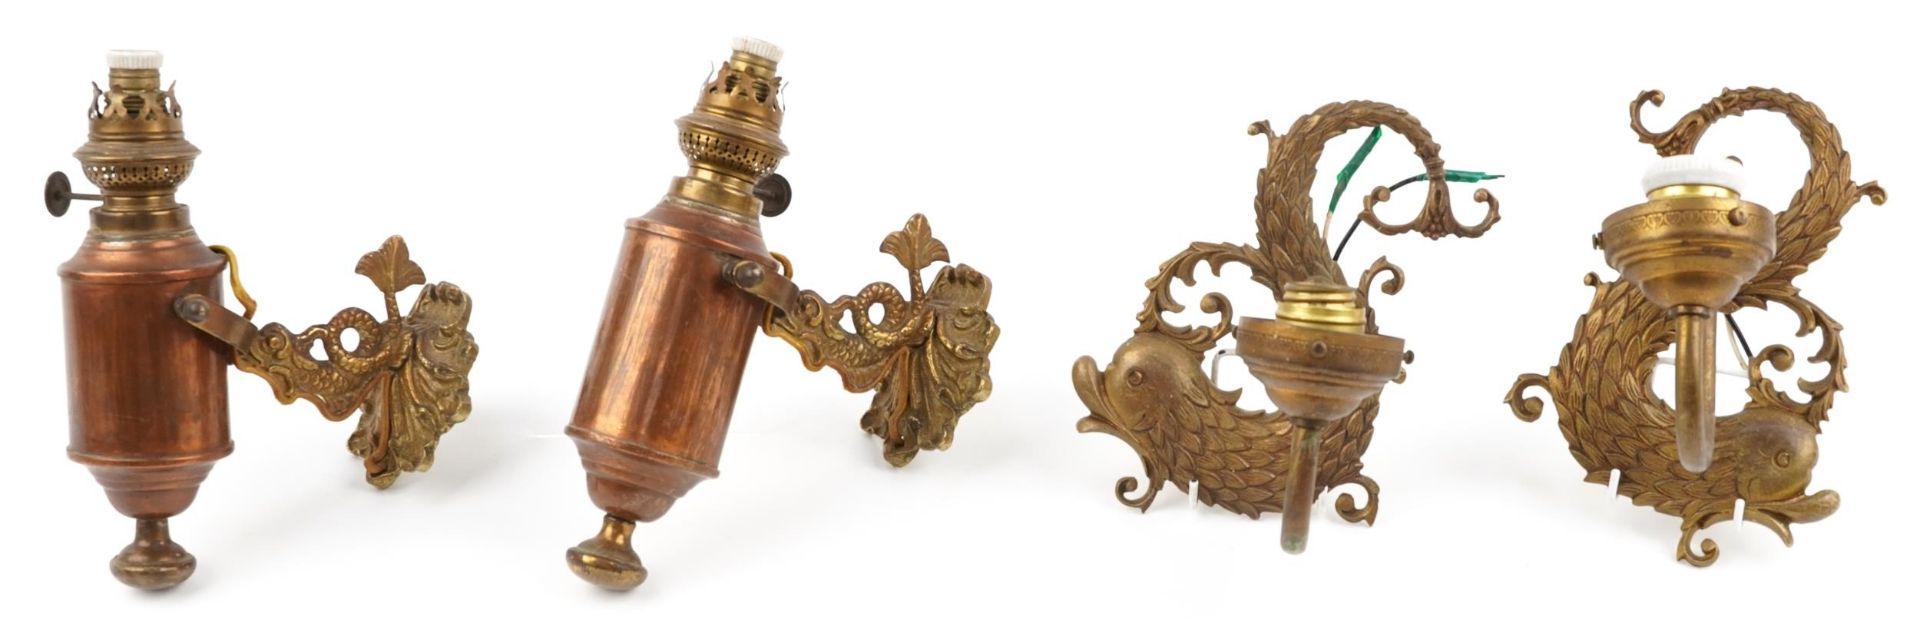 Two pairs of 19th century style brass seahorse design wall sconces including a pair with copper